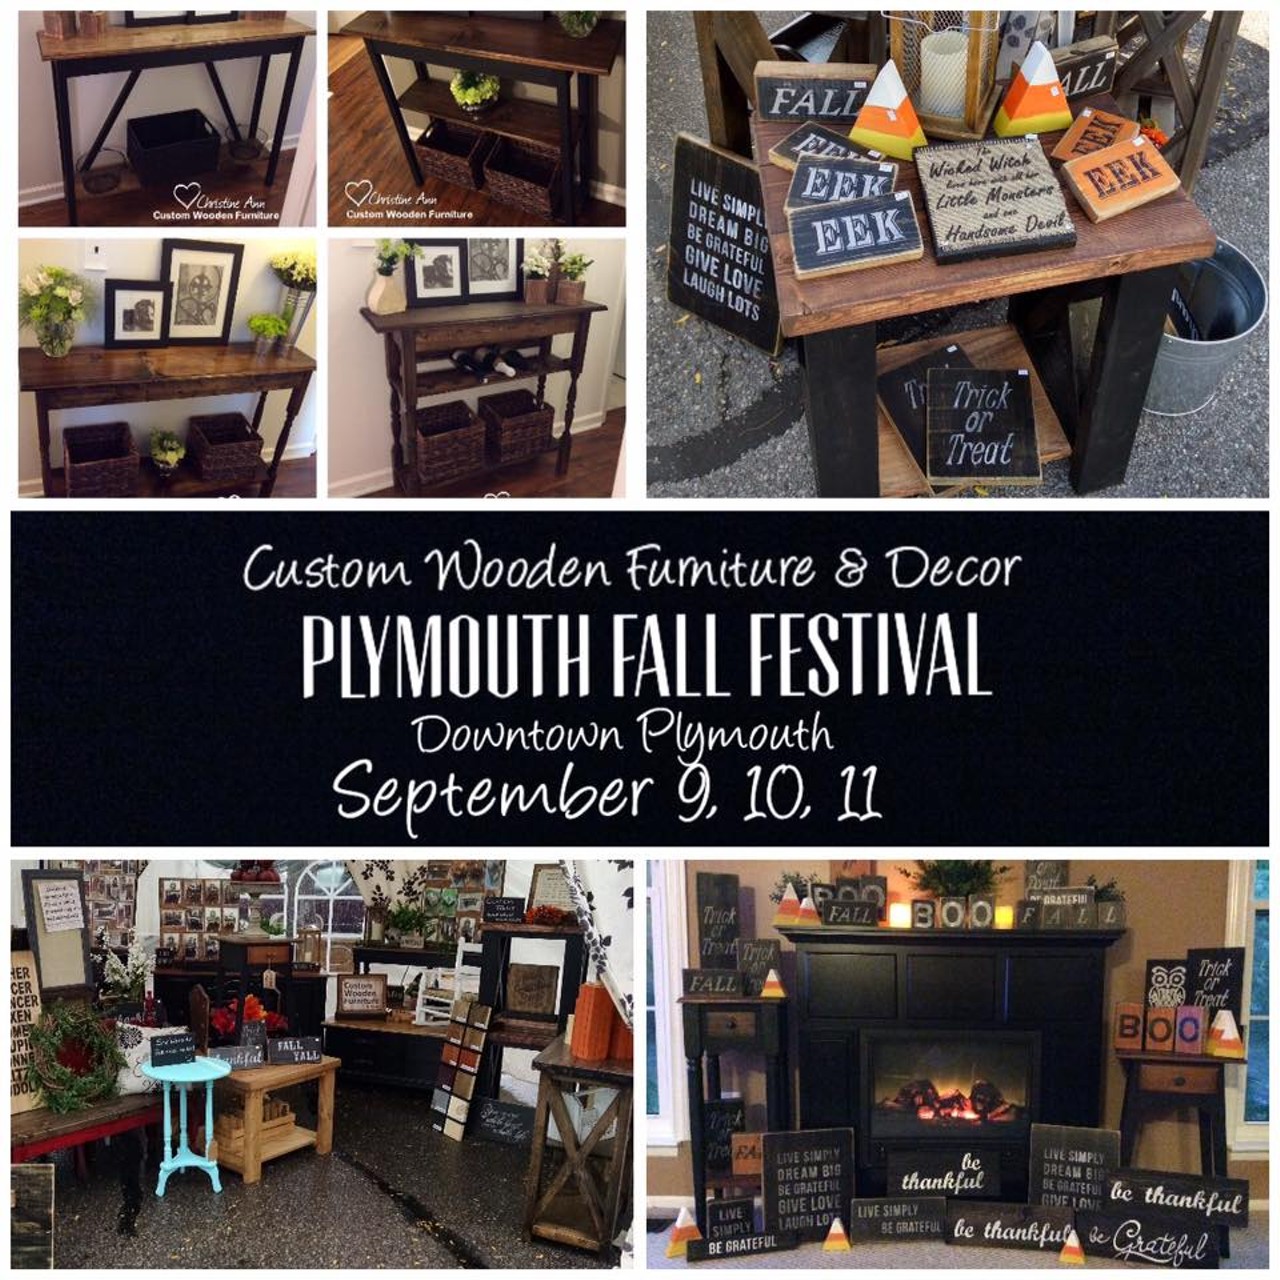 Fri-Sun, 9/9-9/11
Plymouth Fall Festival
@ Downtown Plymouth
Ah, the season of outdoor festivals is finally coming to end. Soak up the last bit of al fresco fun at the Plymouth Fall Festival where you can enjoy carnival rides, a craft fair, live entertainment from the Plymouth Drum and Fife band, the Dale Hicks Band, and Detroit Soul Revue, plus a pancake breakfast, a spaghetti dinner, a car show, bingo, and plenty more. The whole thing takes place in the heart of downtown Plymouth, which is enough of a destination in and of itself. 
Runs noon to 11 p.m. on Friday, 7 a.m.-11 p.m. on Saturday, 8 a.m.-6 p.m. on Sunday; 223 S. Main St., Plymouth; plymouthfallfestival.com; 734-335-0199; plymouthfallfestival.com; admission is free.